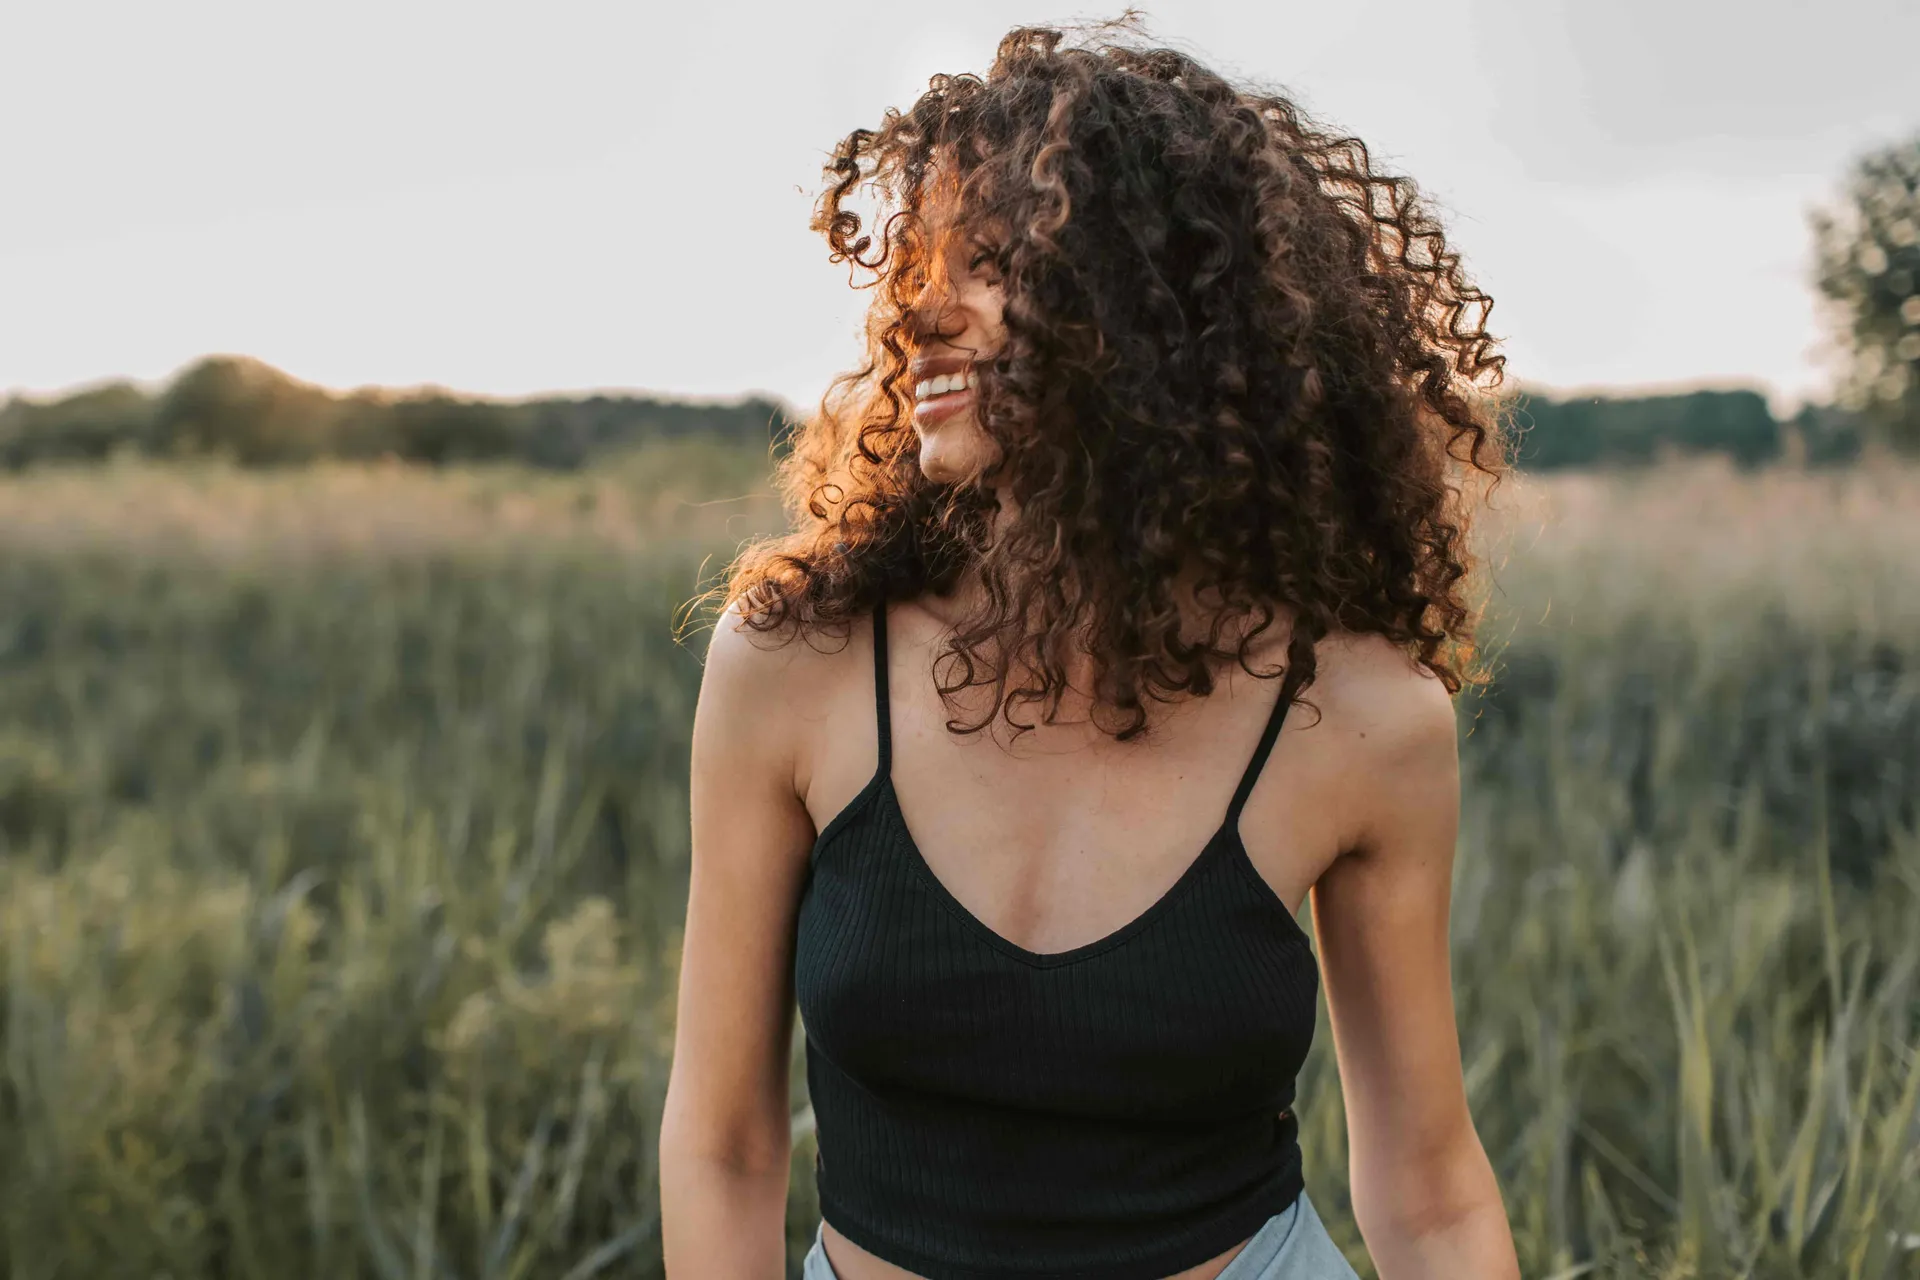 Products to make your curly hair look amazing